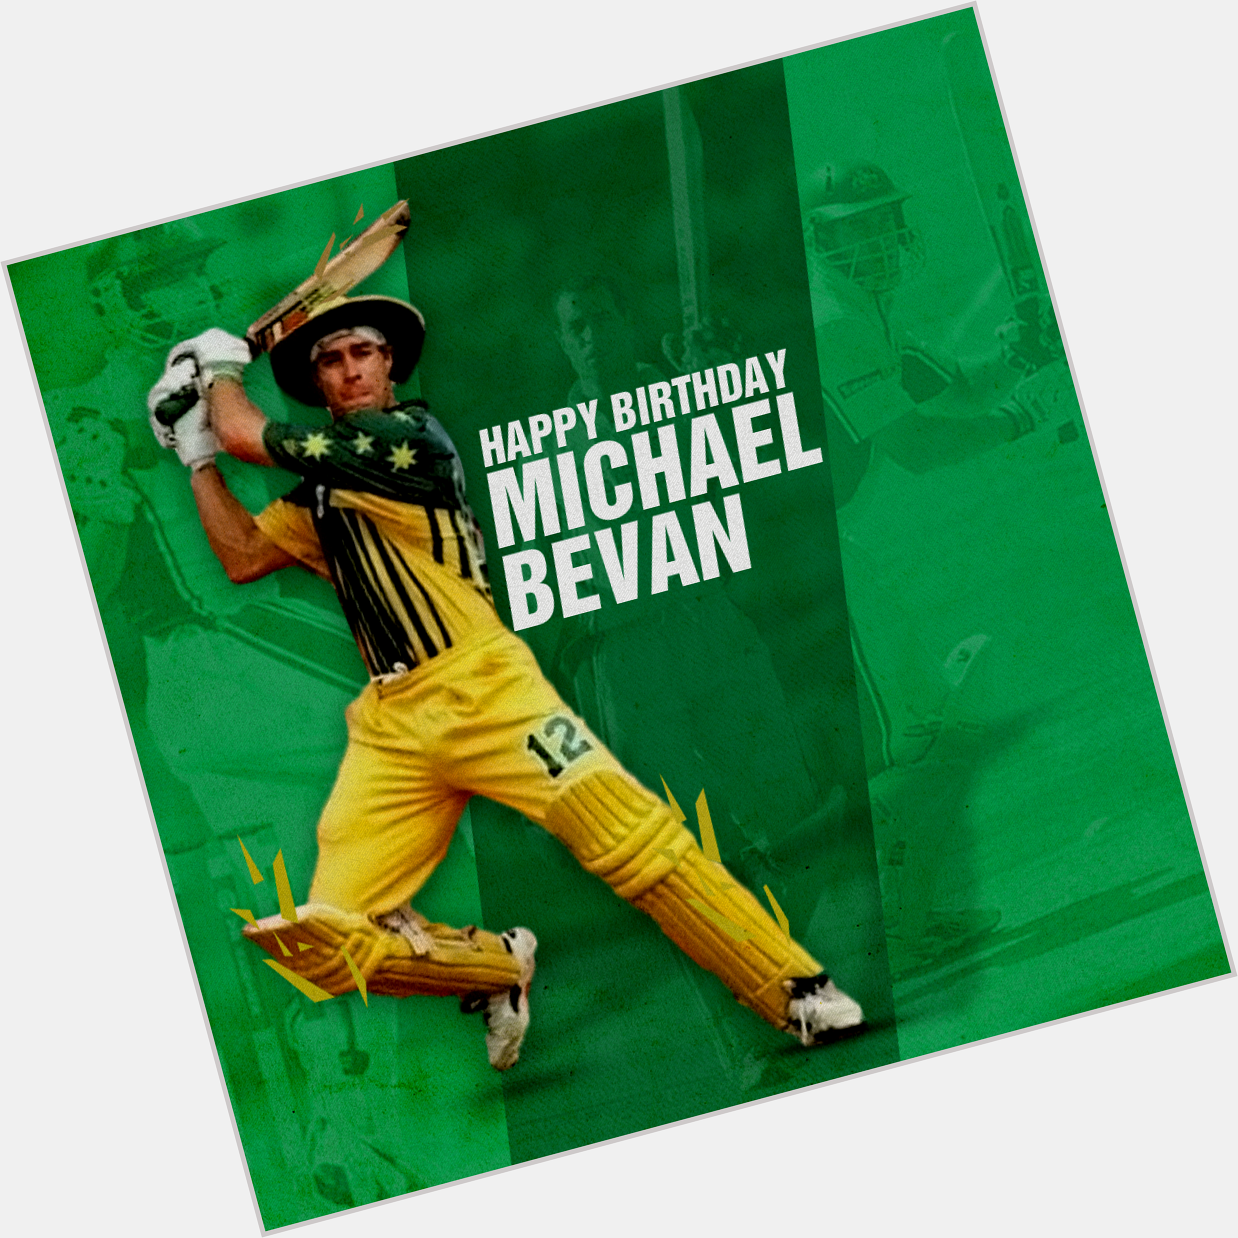 We wish Australian legend and one of the greatest ODI finishers ever, Michael Bevan, a very happy birthday! 